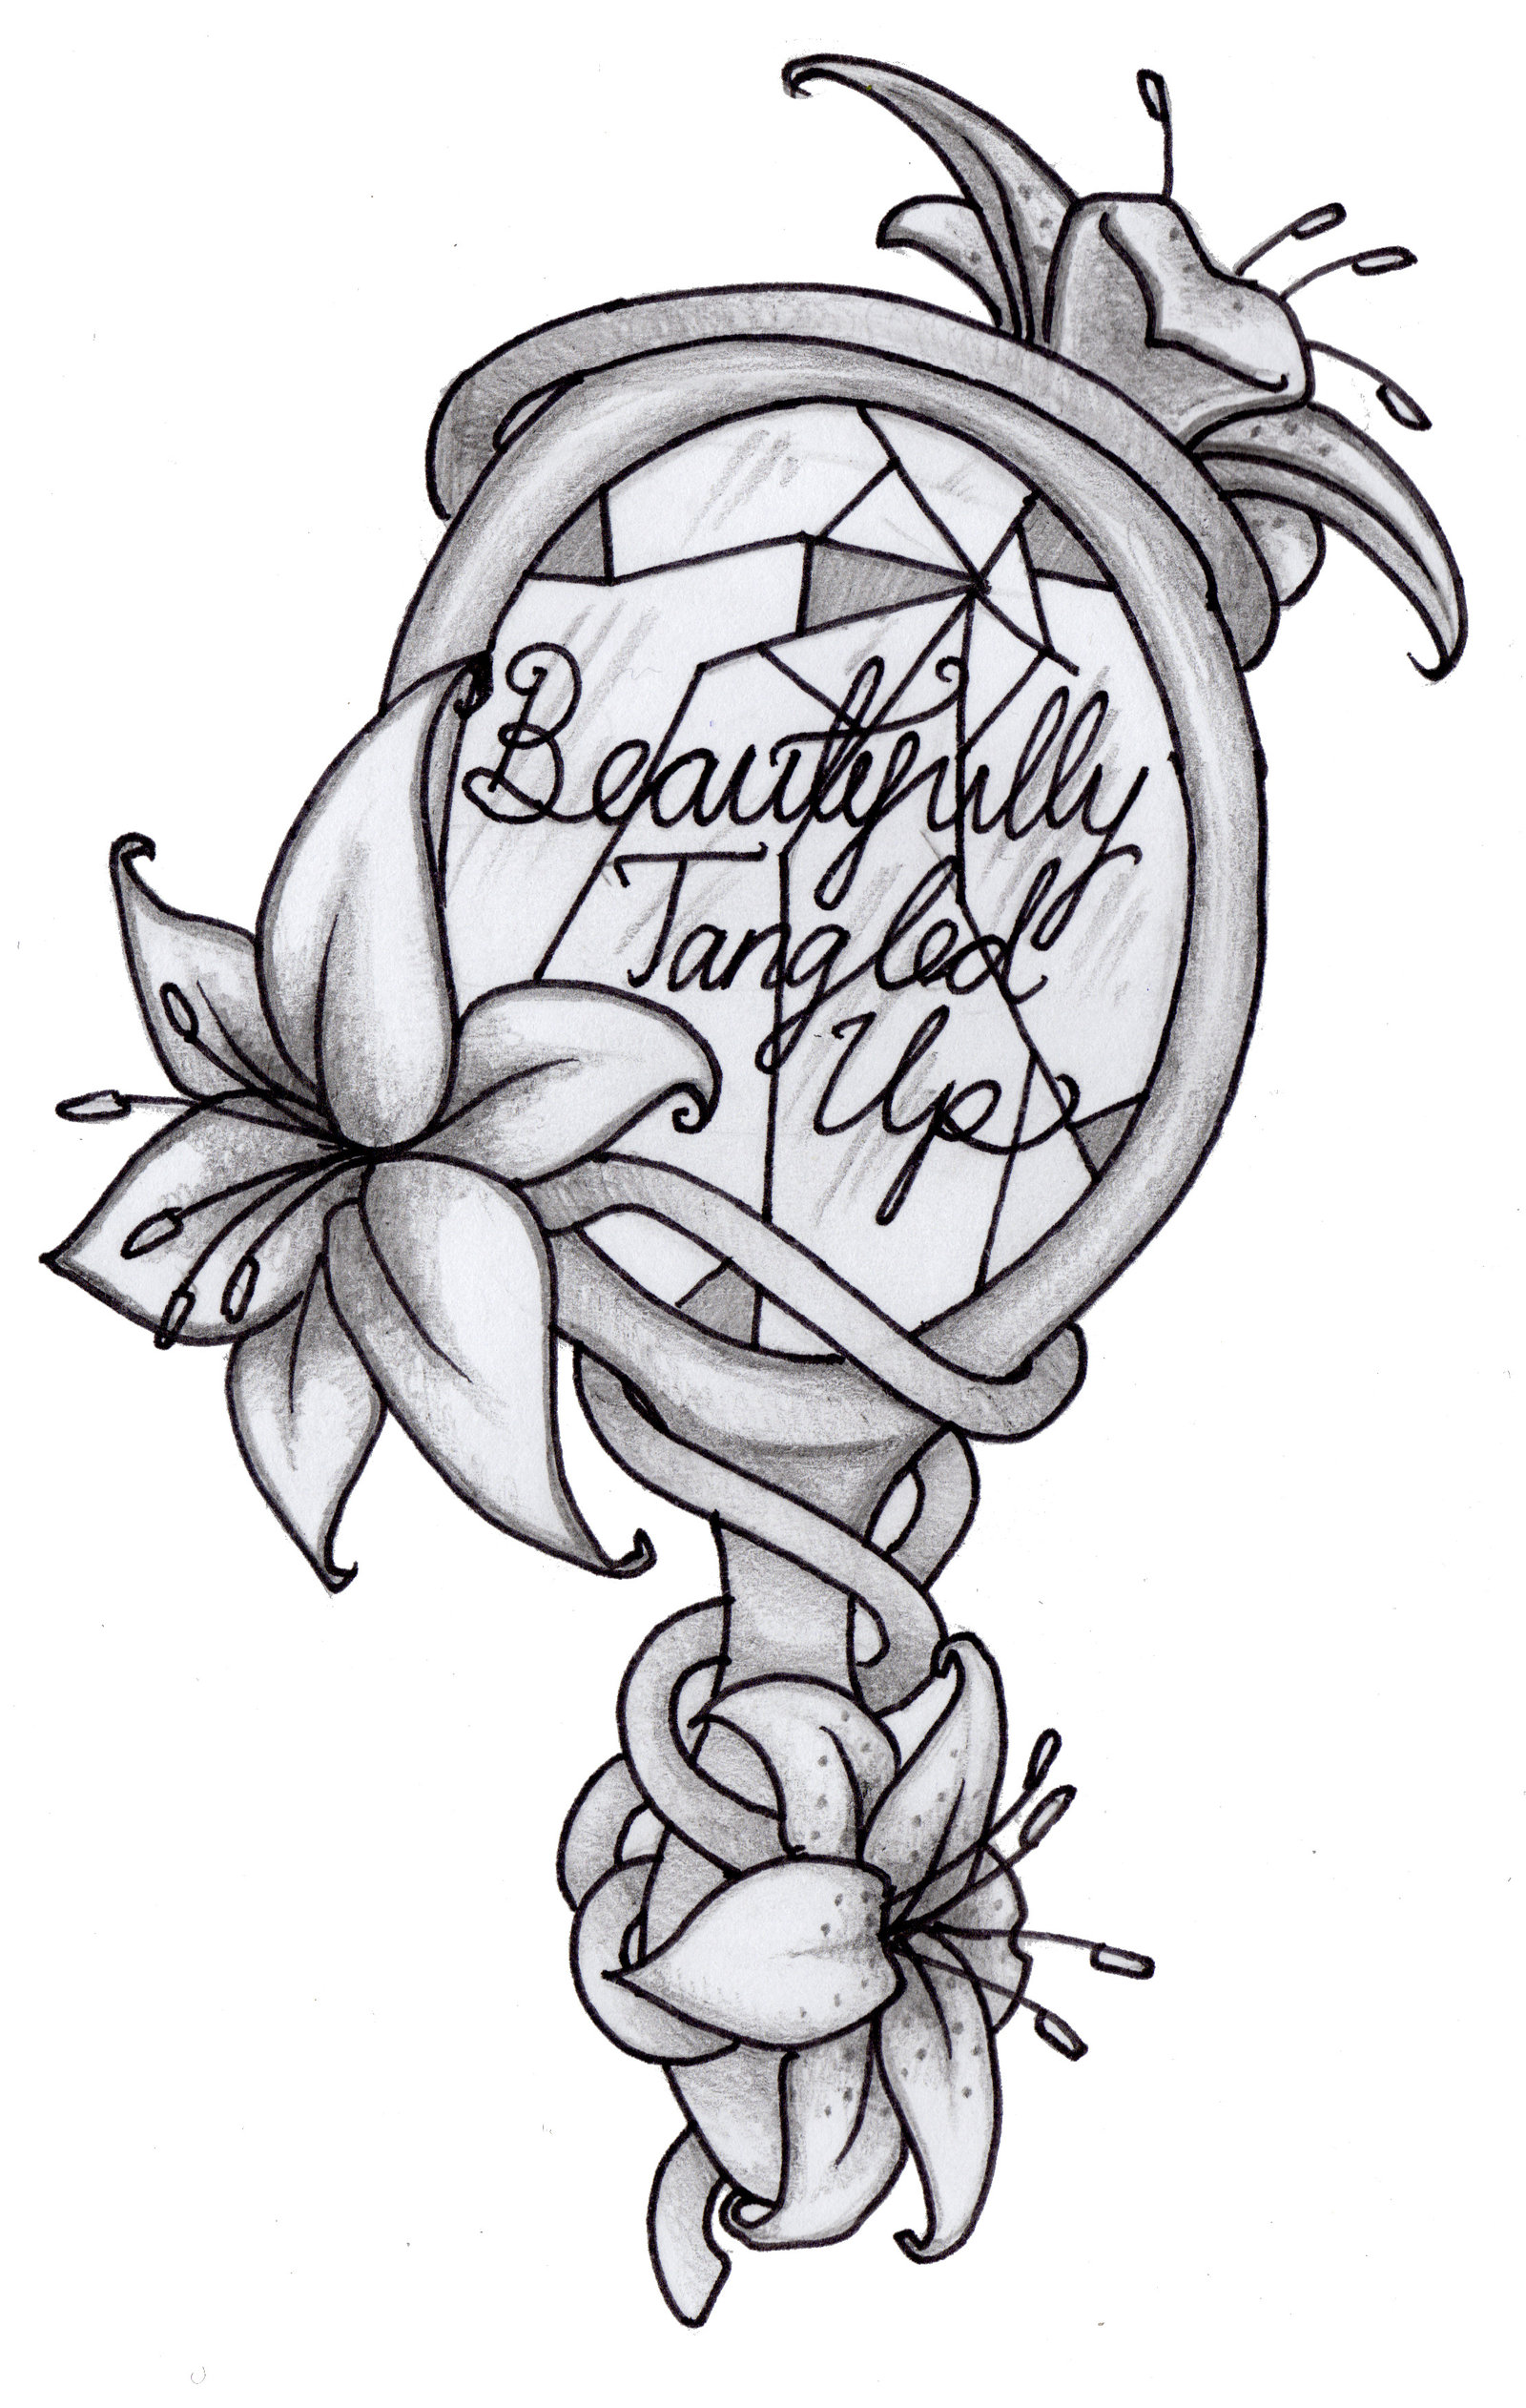 38 Beautiful Lily Tattoo Ideas to Inspire You in 2023